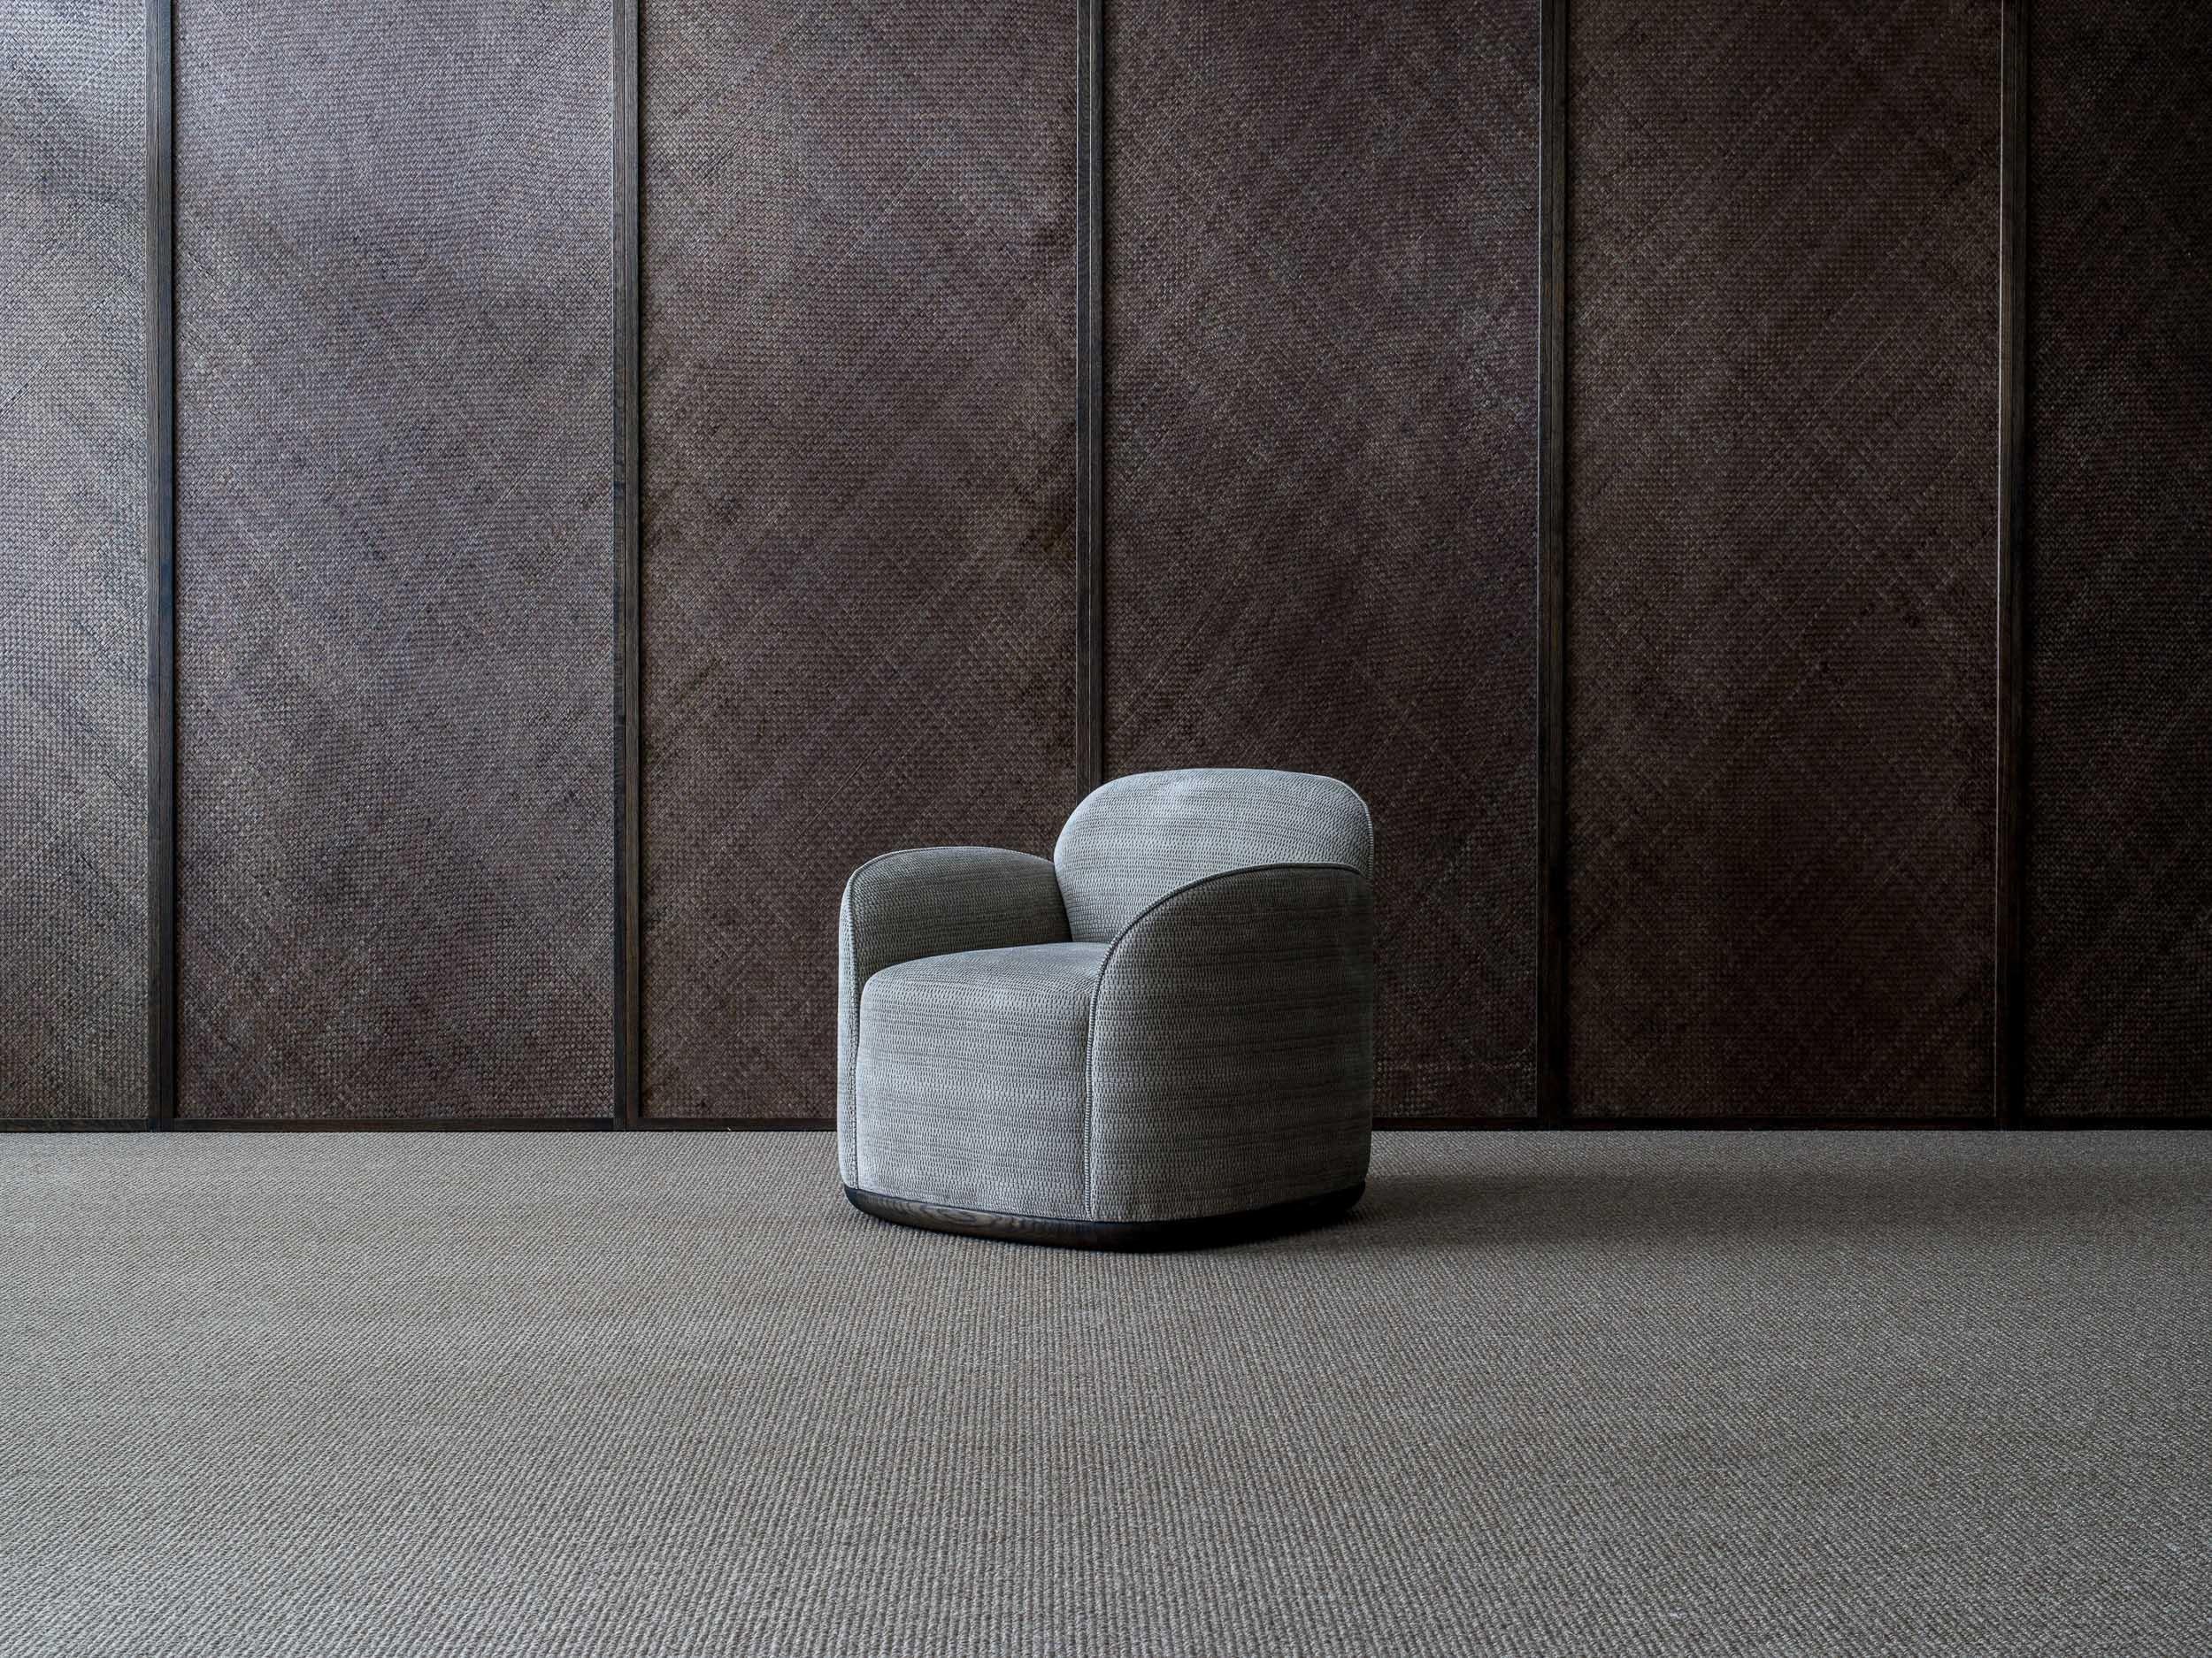 SWIVEL OPTION FOR UNIO ARMCHAIR

 --
The Unio Collection, featuring an armchair and sofas, opens a new chapter for Poiat Studio & Furniture, with a focus on new furniture forms and textures. Offering a view of new and upcoming while at the same time